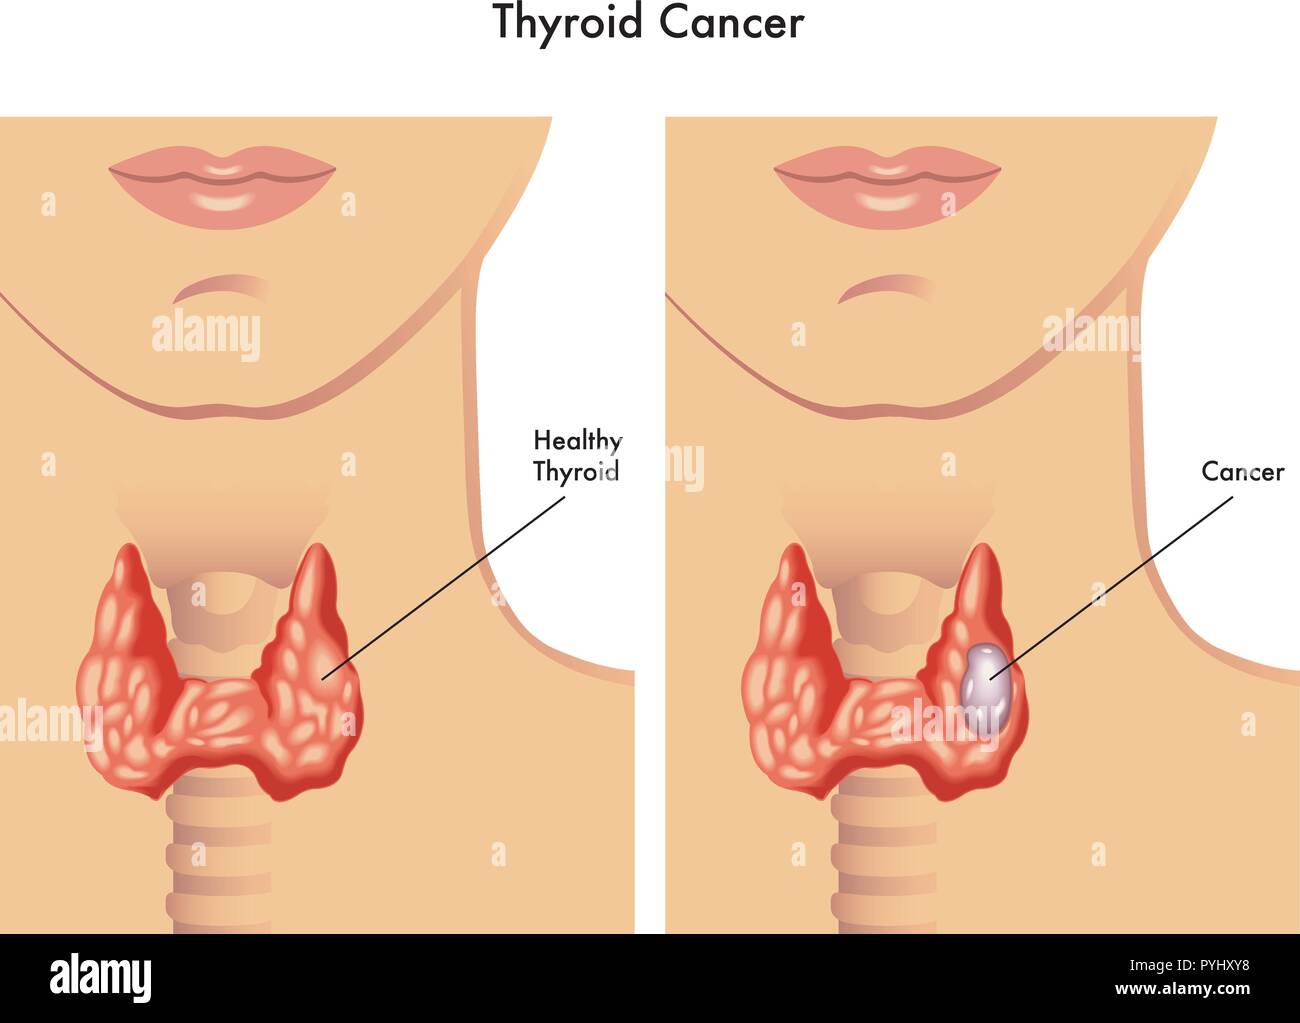 medical illustration of the effects of the thyroid cancer Stock Vector